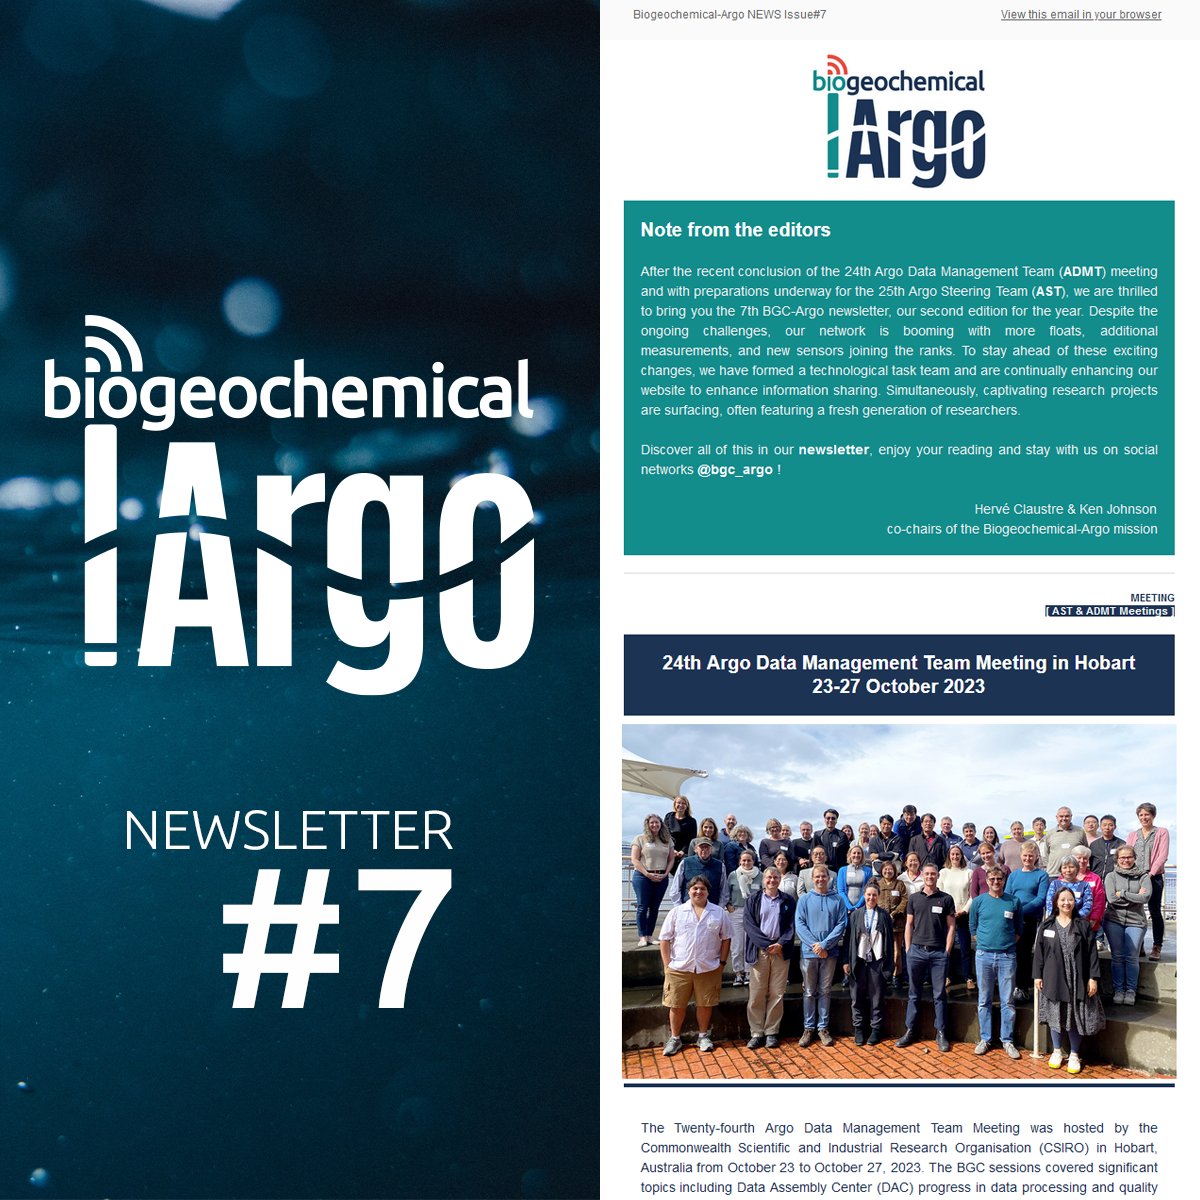 🌊 The 7th Biogeochemical Argo Newsletter is out! Explore the latest updates from the most ambitious program for global biogeochemical ocean observation. Read now 📄 mailchi.mp/2697012d6973/b…, and subscribe for future editions 👉 eepurl.com/cn8WoH